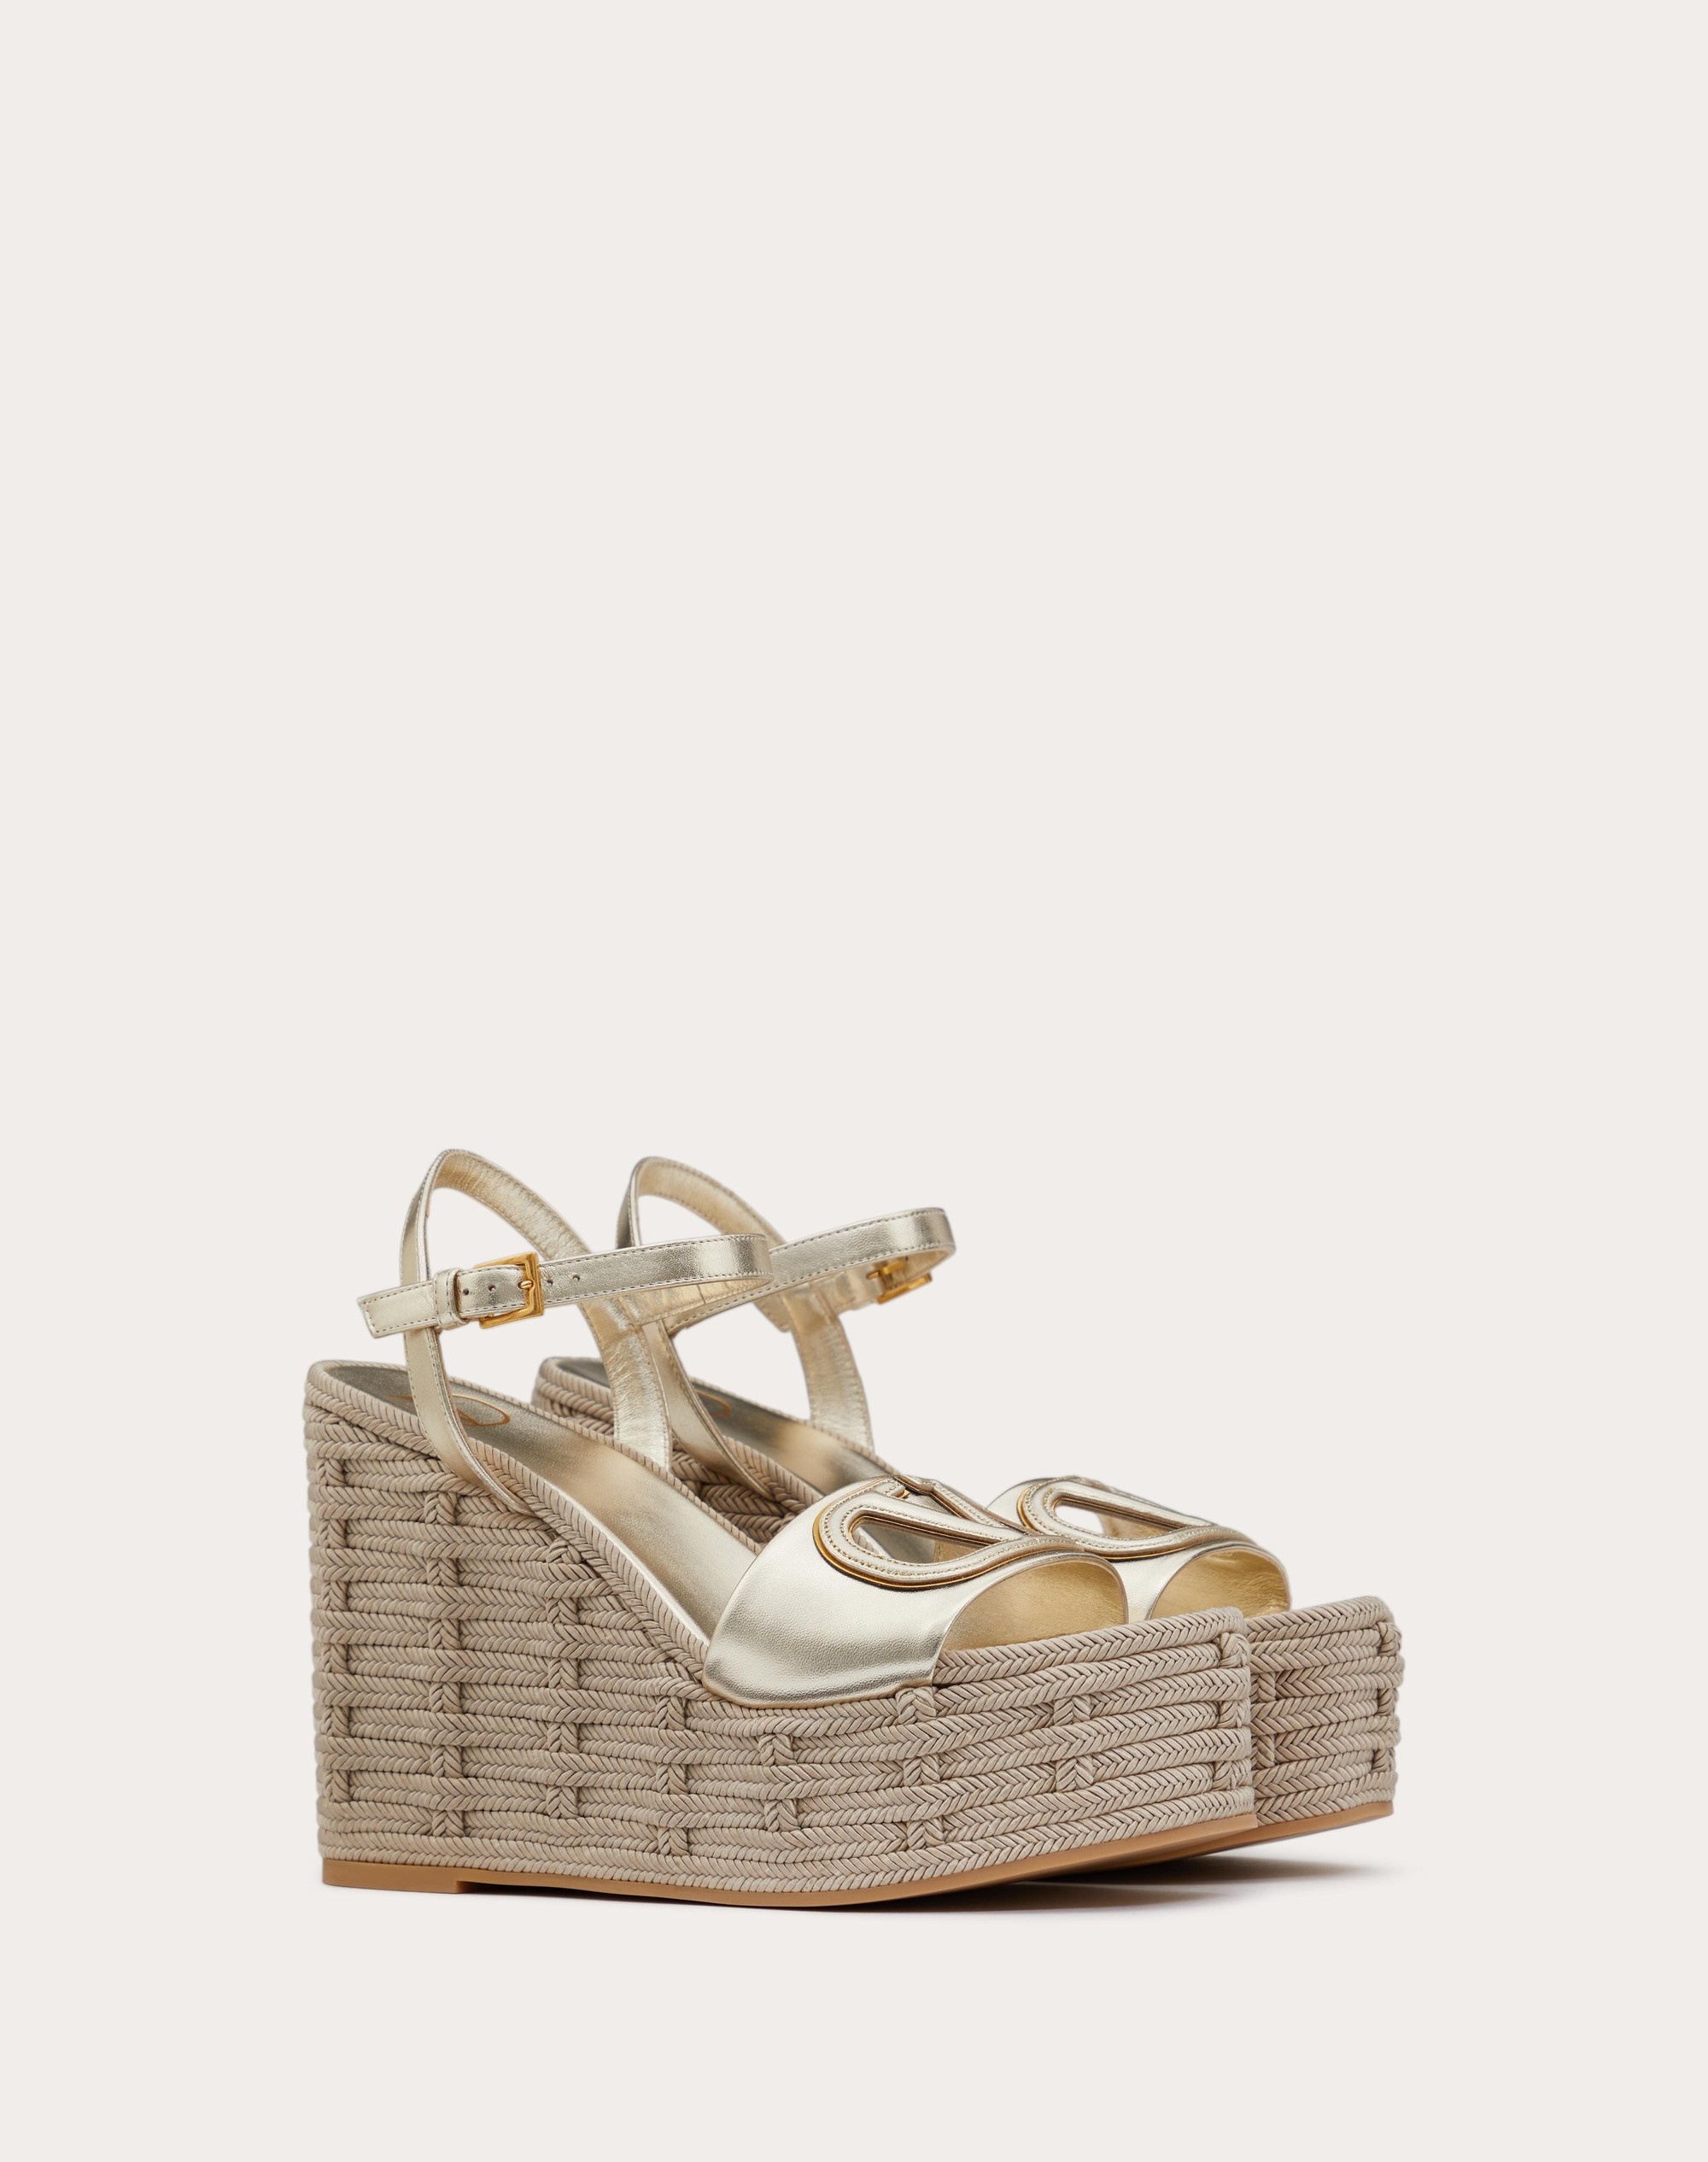 VLOGO CUT-OUT WEDGE SANDAL IN LAMINATED NAPPA LEATHER 110MM - 2